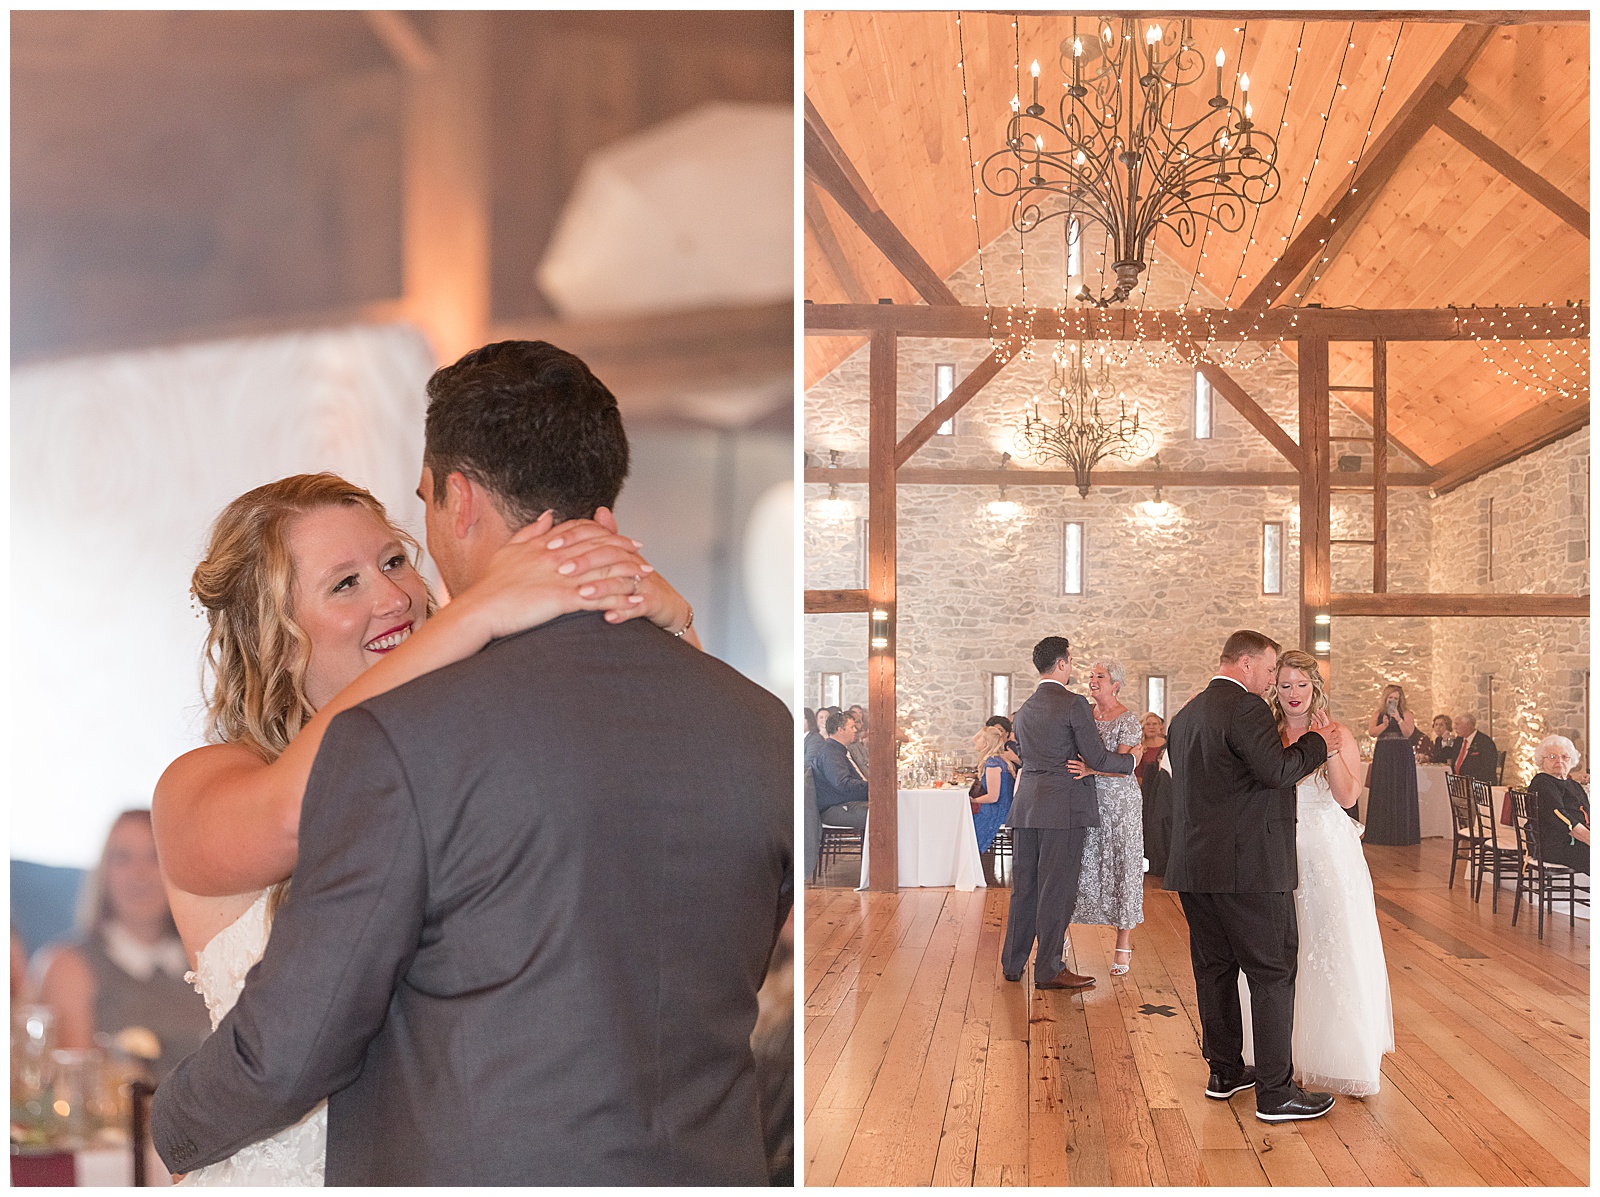 couple hugging tightly as they share their first dance during wedding reception inside beautiful historic barn